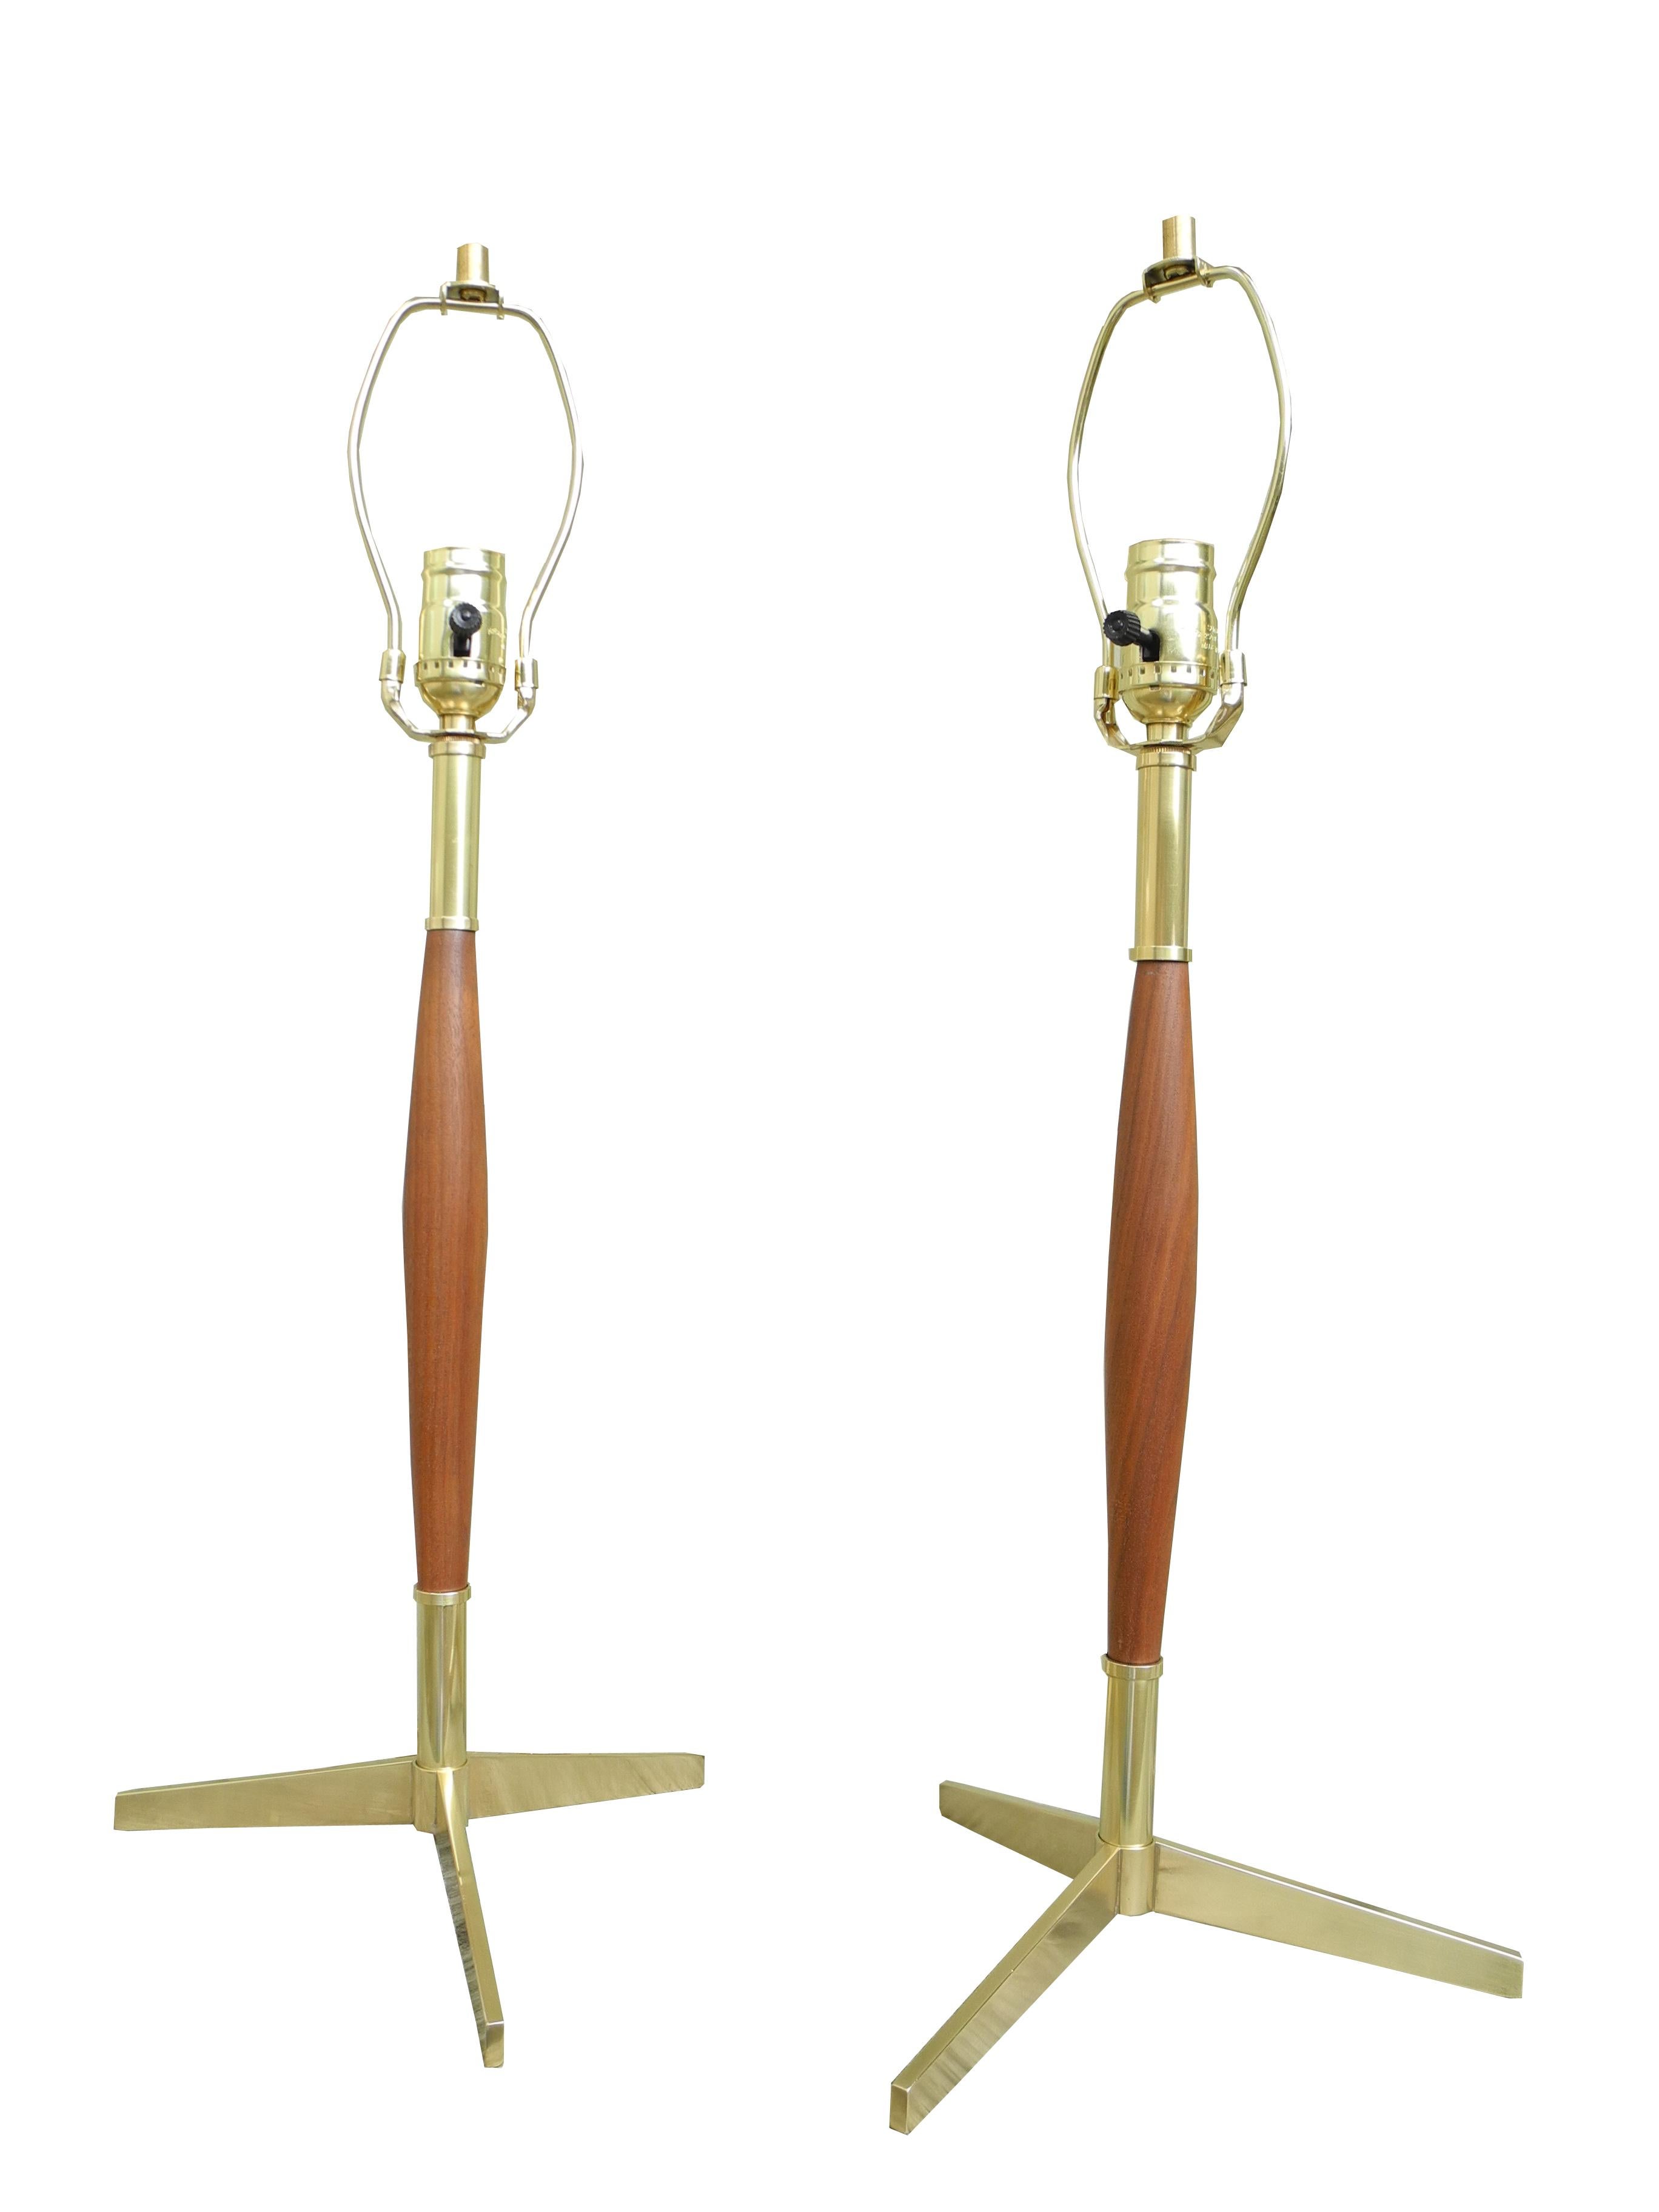 These walnut and brass table lamps were designed by Gerald Thurston in the 1950s. Perfect bedside lamps.